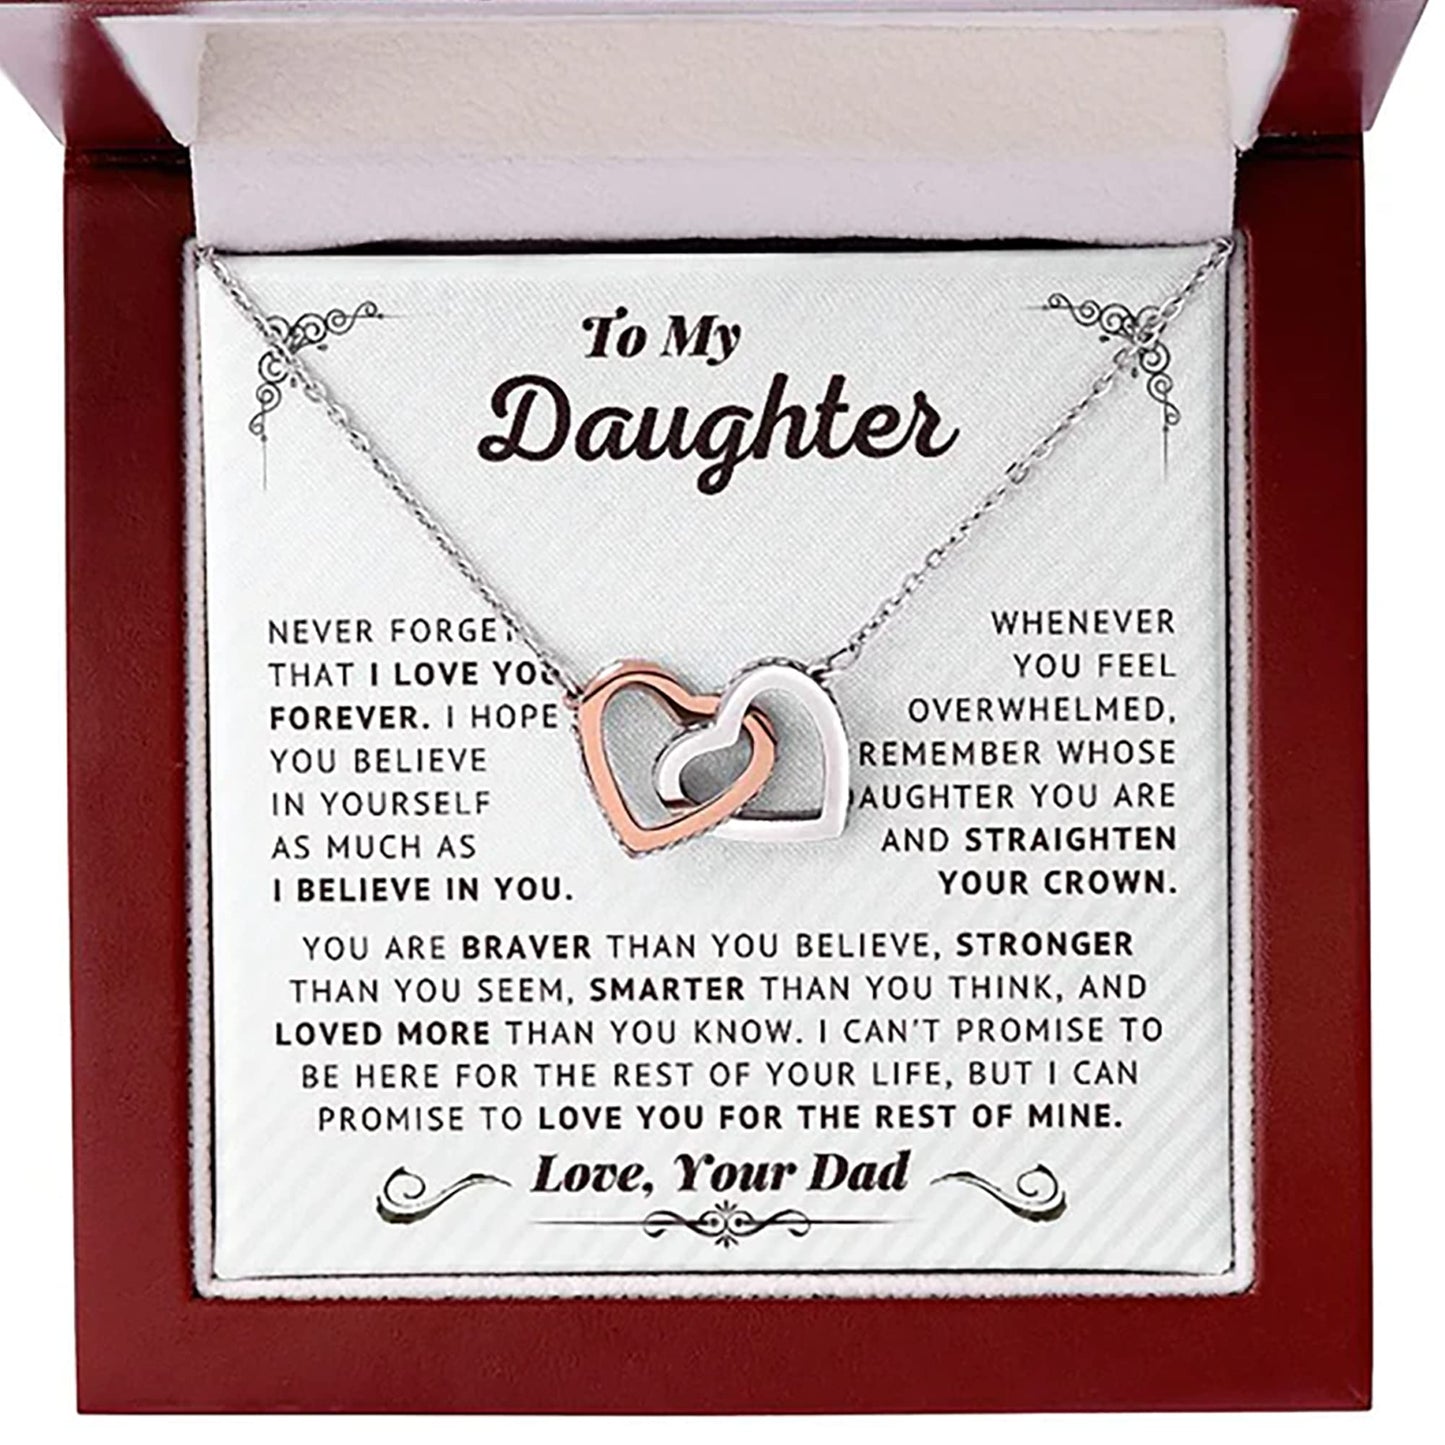 Daughter Gifts From Dad - To My Daughter Necklace From Dad Believe In Yourself Love Knot Necklace Gifts For Daughter On Birthday Gifts For Daughter Father Daughter Gifts Christmas Graduation Valentine Idea Gifts